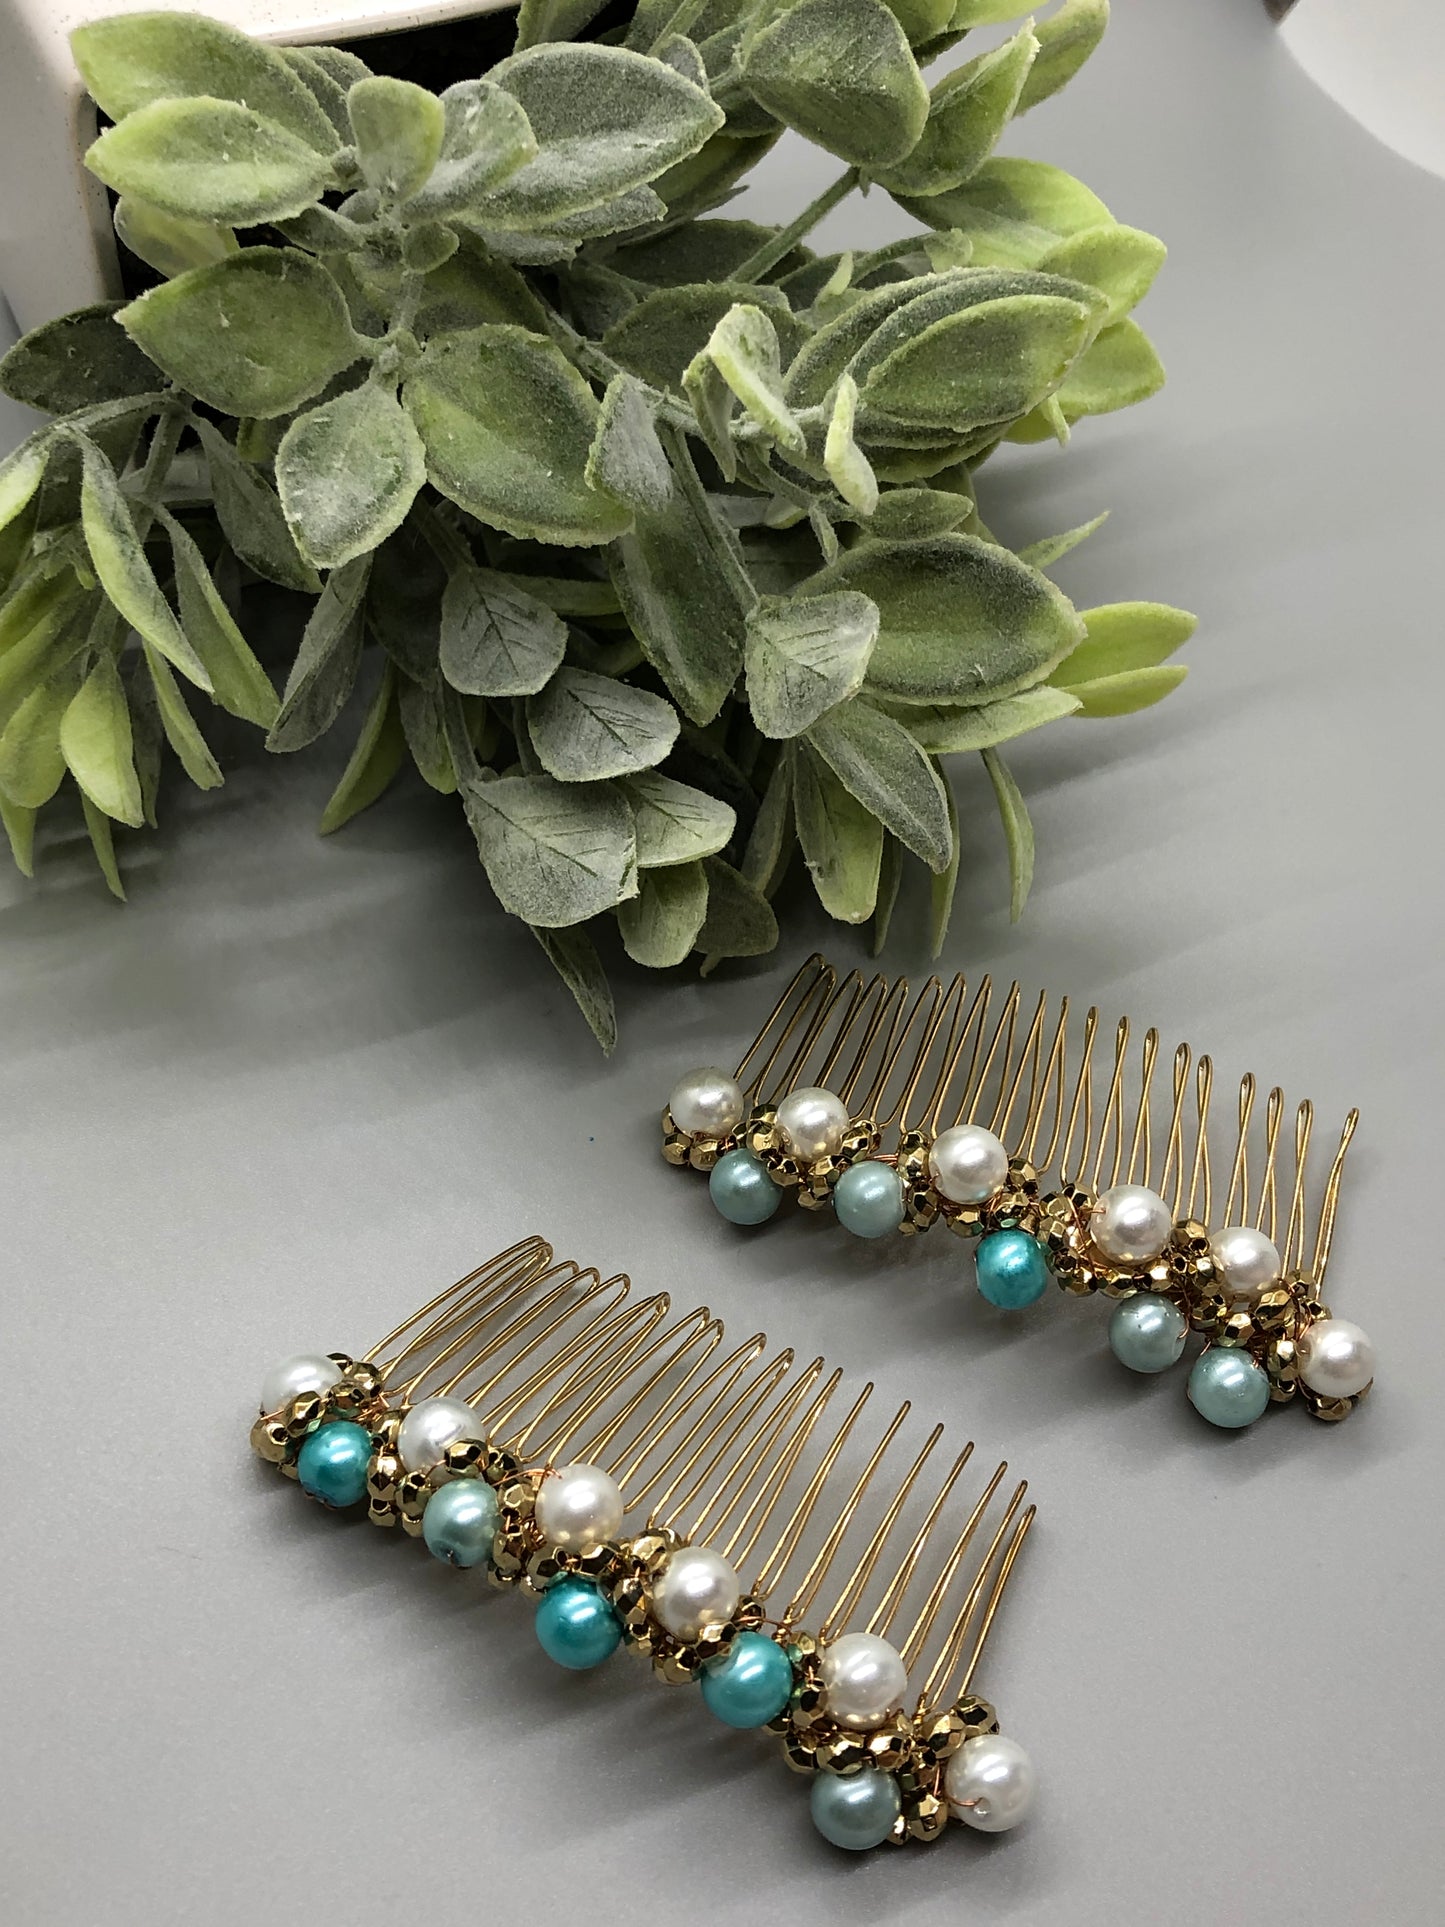 Teal Blue White Gold Beaded Comb Gold Tone 3'5 Metal Comb Retro Bridal Prom Wedding Party